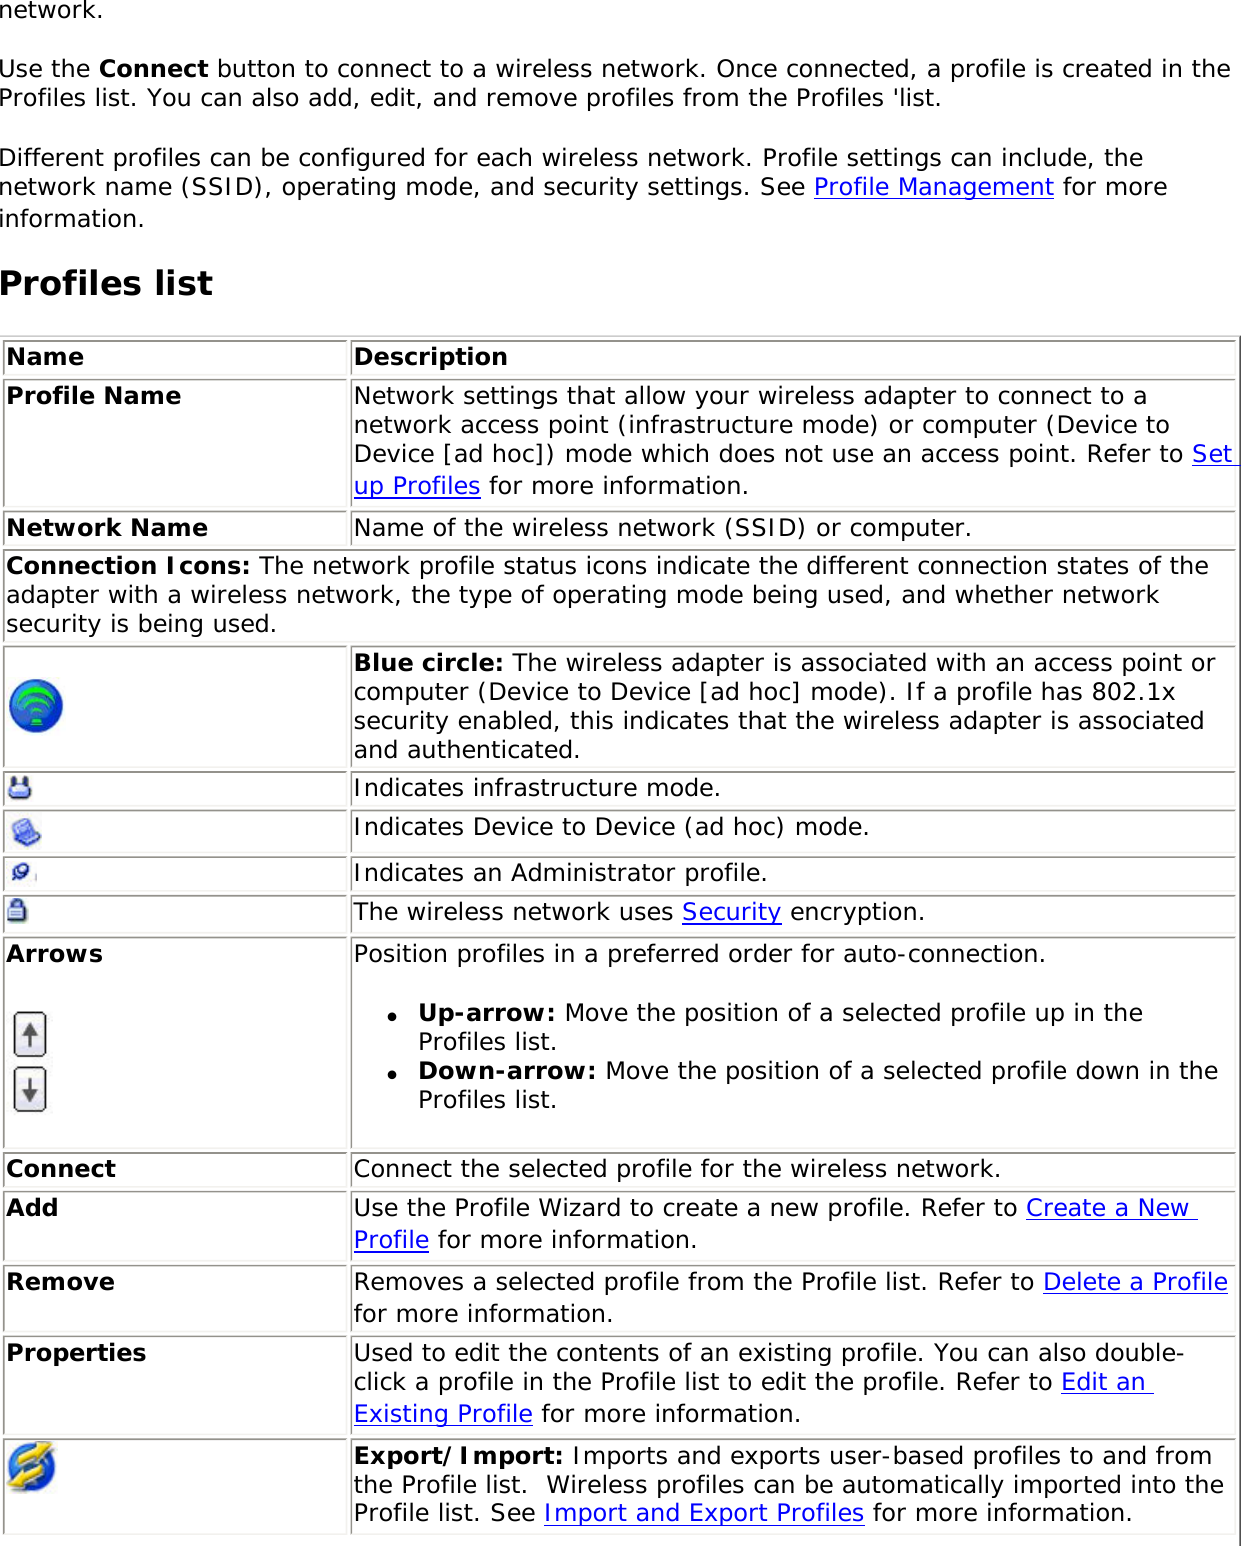 network. Use the Connect button to connect to a wireless network. Once connected, a profile is created in the Profiles list. You can also add, edit, and remove profiles from the Profiles &apos;list. Different profiles can be configured for each wireless network. Profile settings can include, the network name (SSID), operating mode, and security settings. See Profile Management for more information. Profiles list Name DescriptionProfile Name Network settings that allow your wireless adapter to connect to a network access point (infrastructure mode) or computer (Device to Device [ad hoc]) mode which does not use an access point. Refer to Set up Profiles for more information.Network Name Name of the wireless network (SSID) or computer.Connection Icons: The network profile status icons indicate the different connection states of the adapter with a wireless network, the type of operating mode being used, and whether network security is being used.  Blue circle: The wireless adapter is associated with an access point or computer (Device to Device [ad hoc] mode). If a profile has 802.1x security enabled, this indicates that the wireless adapter is associated and authenticated.Indicates infrastructure mode.Indicates Device to Device (ad hoc) mode.Indicates an Administrator profile. The wireless network uses Security encryption.Arrows Position profiles in a preferred order for auto-connection. ●     Up-arrow: Move the position of a selected profile up in the Profiles list. ●     Down-arrow: Move the position of a selected profile down in the Profiles list.Connect Connect the selected profile for the wireless network.Add  Use the Profile Wizard to create a new profile. Refer to Create a New Profile for more information.Remove  Removes a selected profile from the Profile list. Refer to Delete a Profile for more information.Properties Used to edit the contents of an existing profile. You can also double-click a profile in the Profile list to edit the profile. Refer to Edit an Existing Profile for more information.Export/Import: Imports and exports user-based profiles to and from the Profile list.  Wireless profiles can be automatically imported into the Profile list. See Import and Export Profiles for more information.